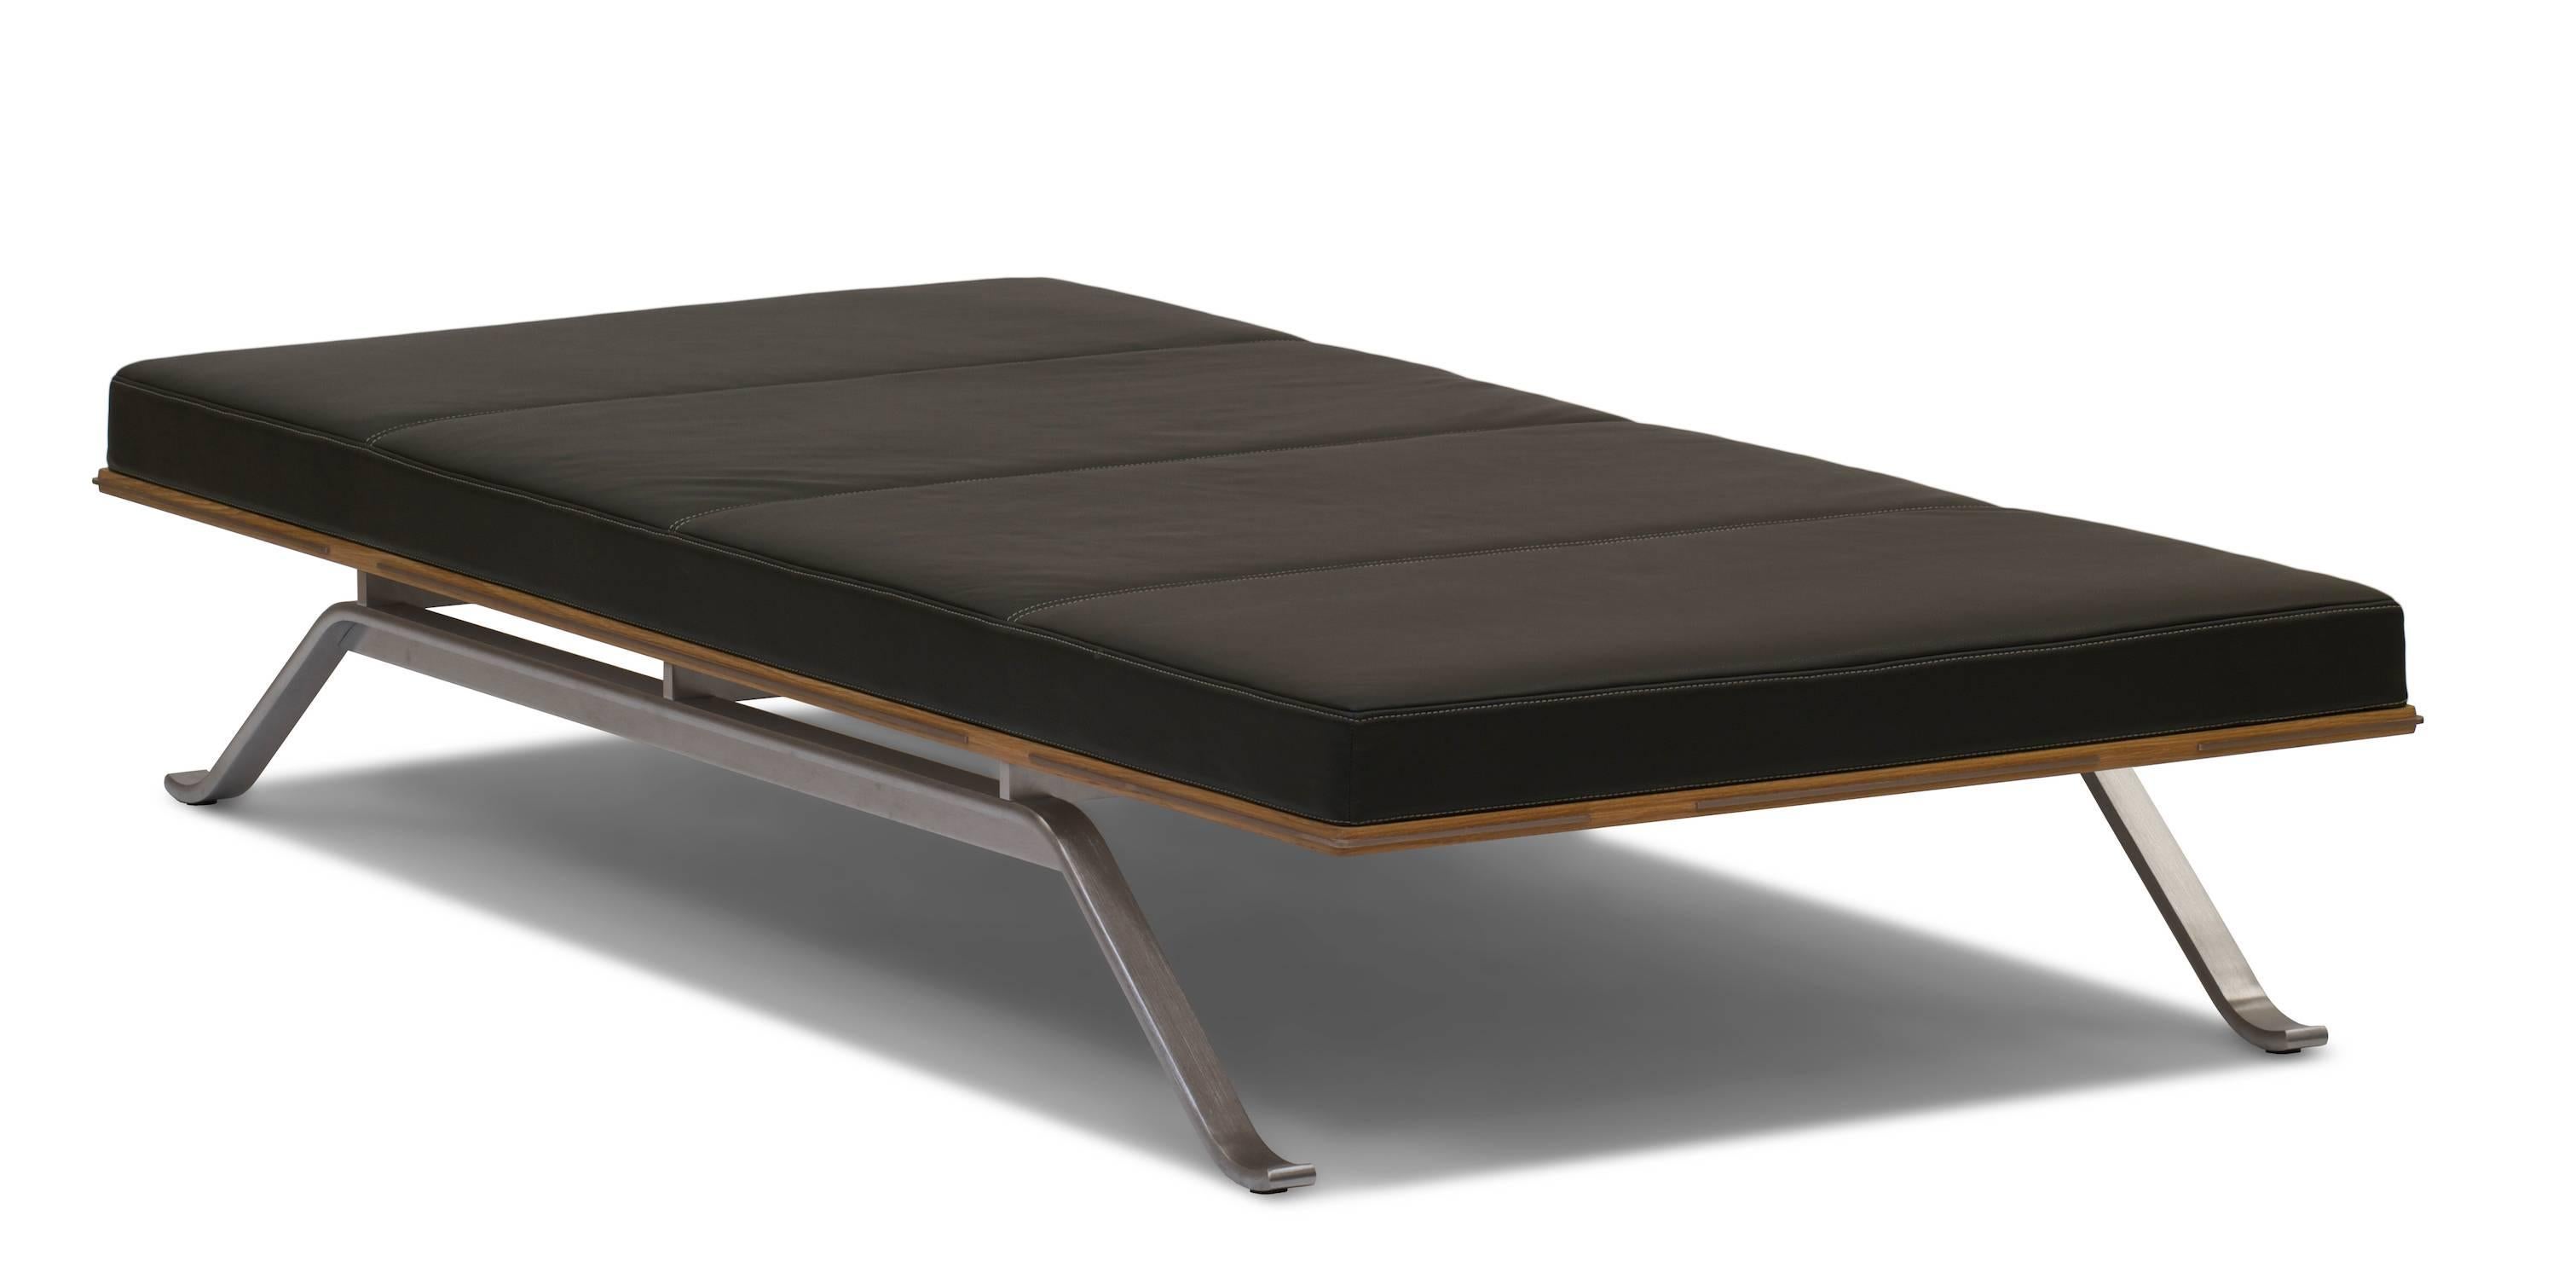 The TK8 daybed has a sleek and straightforward appearance combining leather, wood and stainless steel at its best.

The daybed is ideal for public areas such as airports, and museums, but has also been used in private homes with great